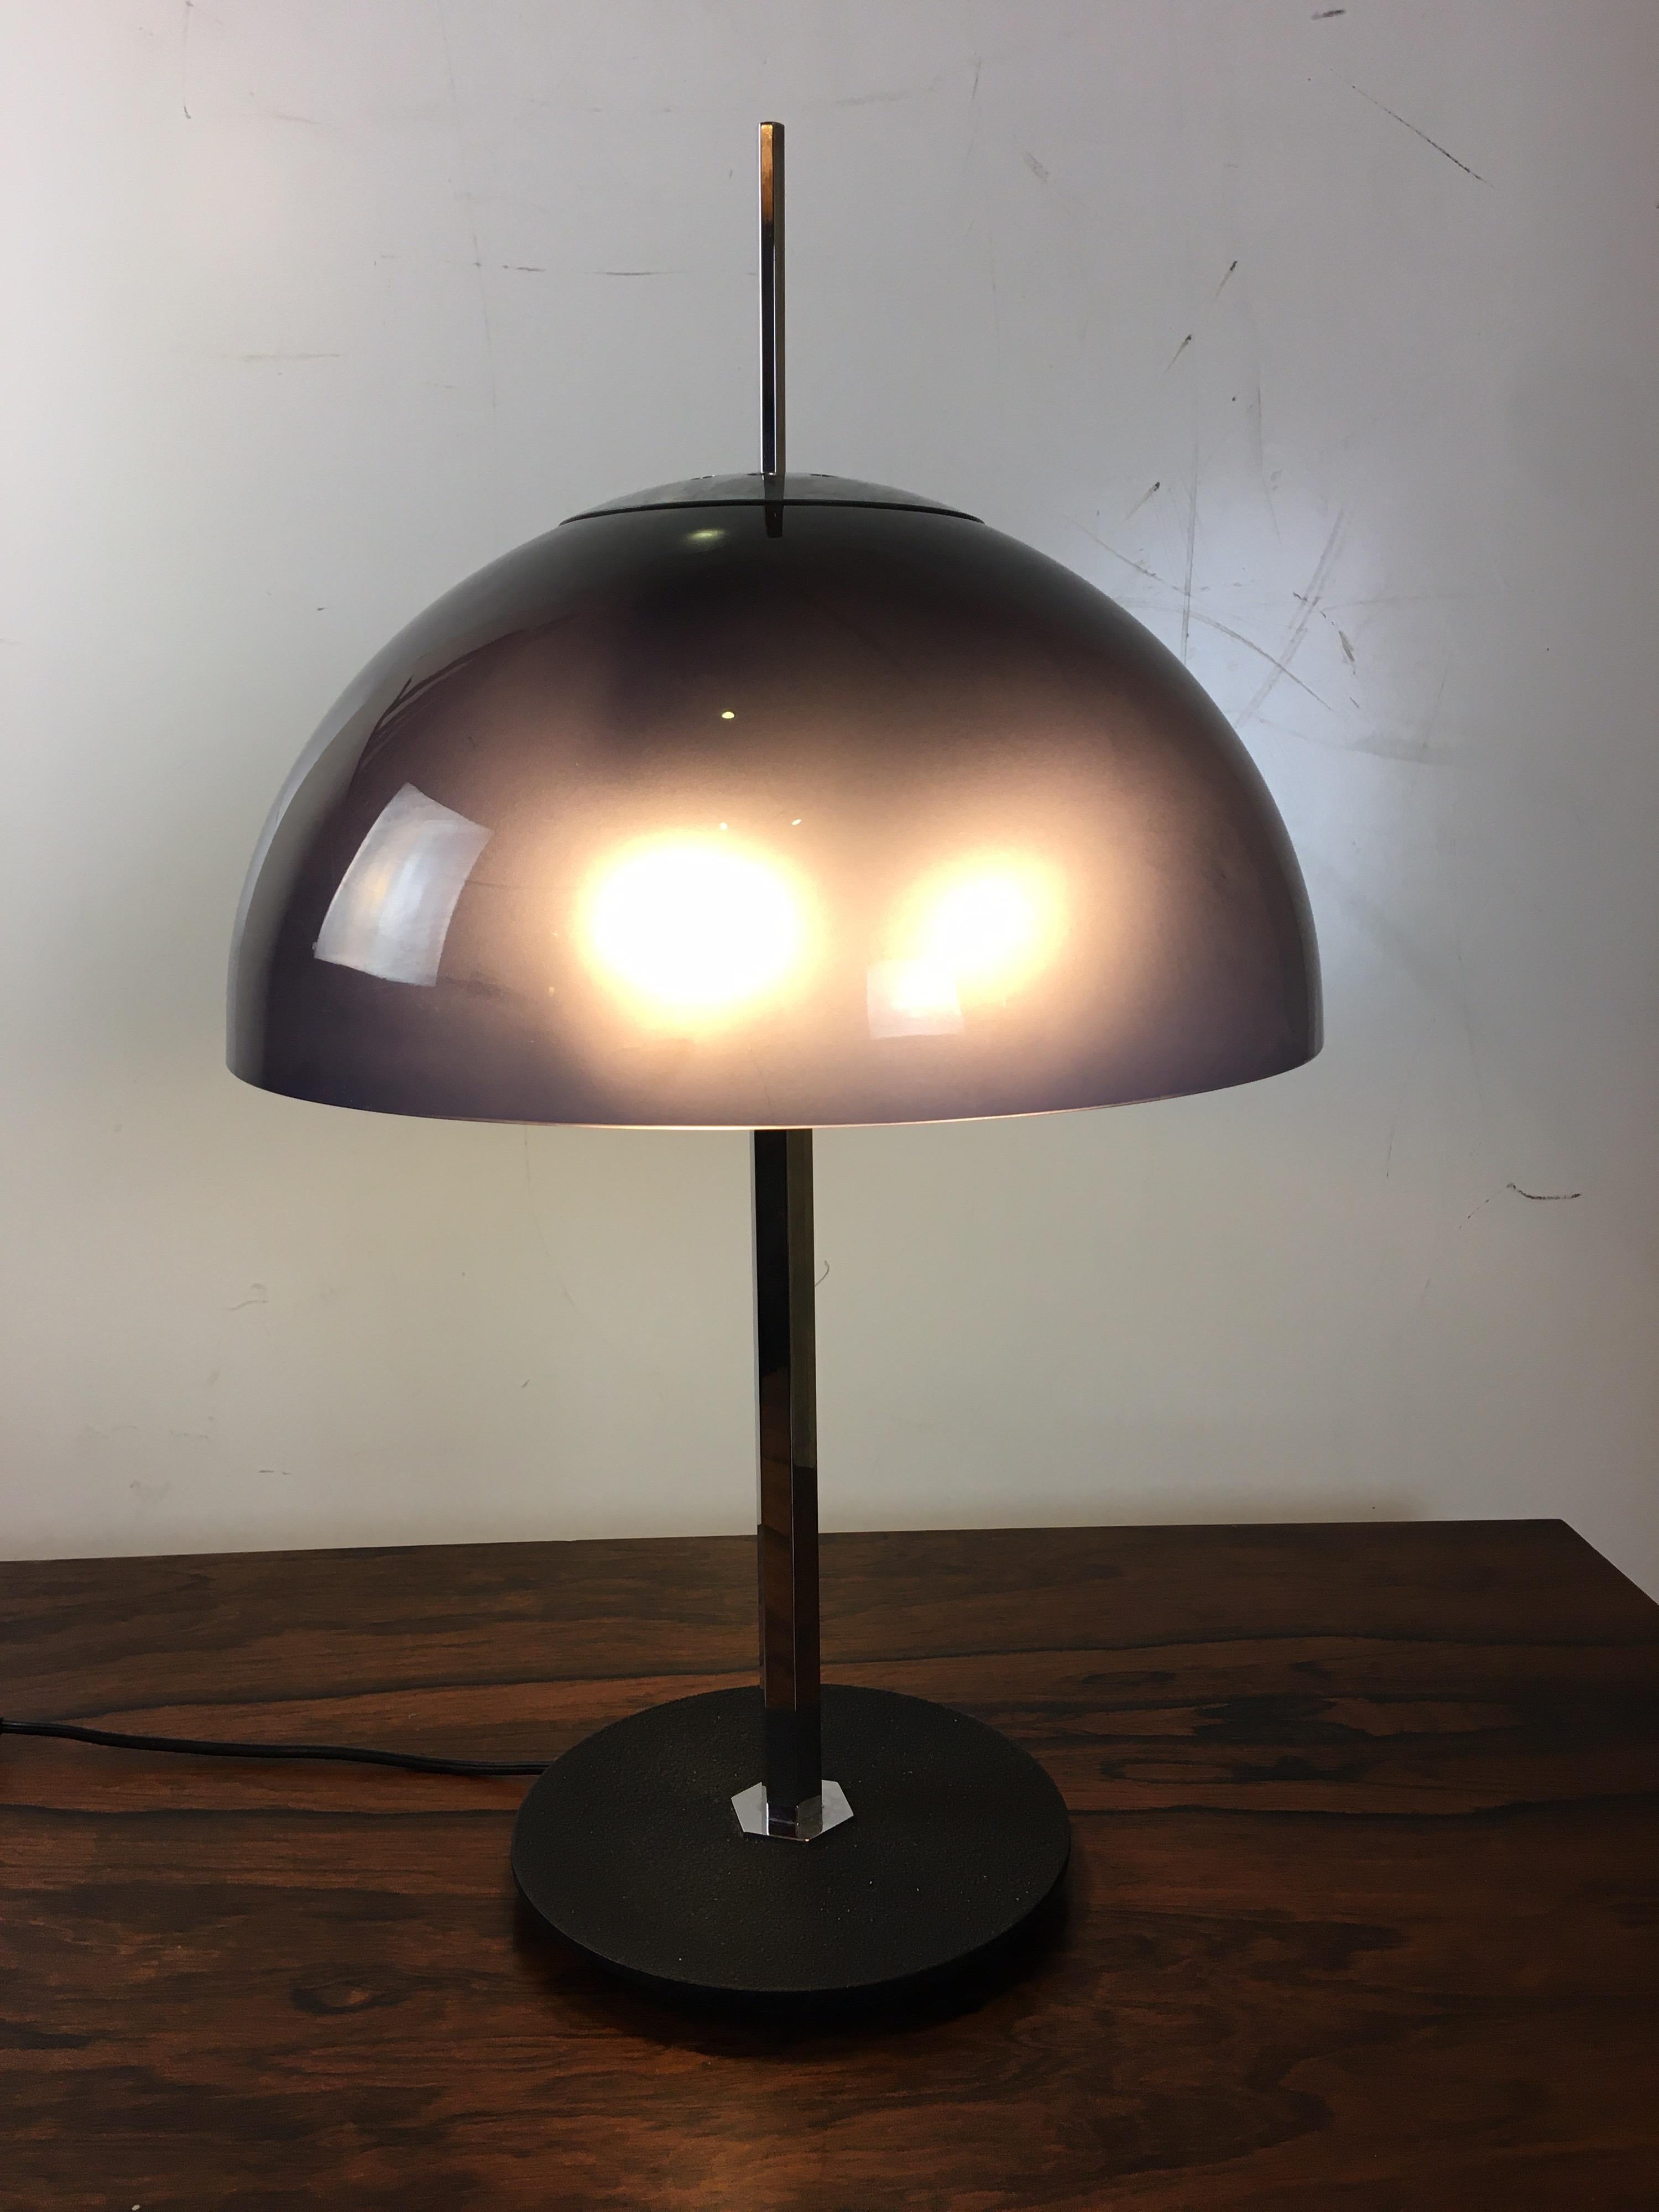 Gino Sarfatti for Aretluce model 584/g table lamp. Designed in 1957, unique frosted plastic shade in tones of purple, topped off with a round chrome concave cover and tall hexagonal finale. Lamp does not come up very often, especially in the United